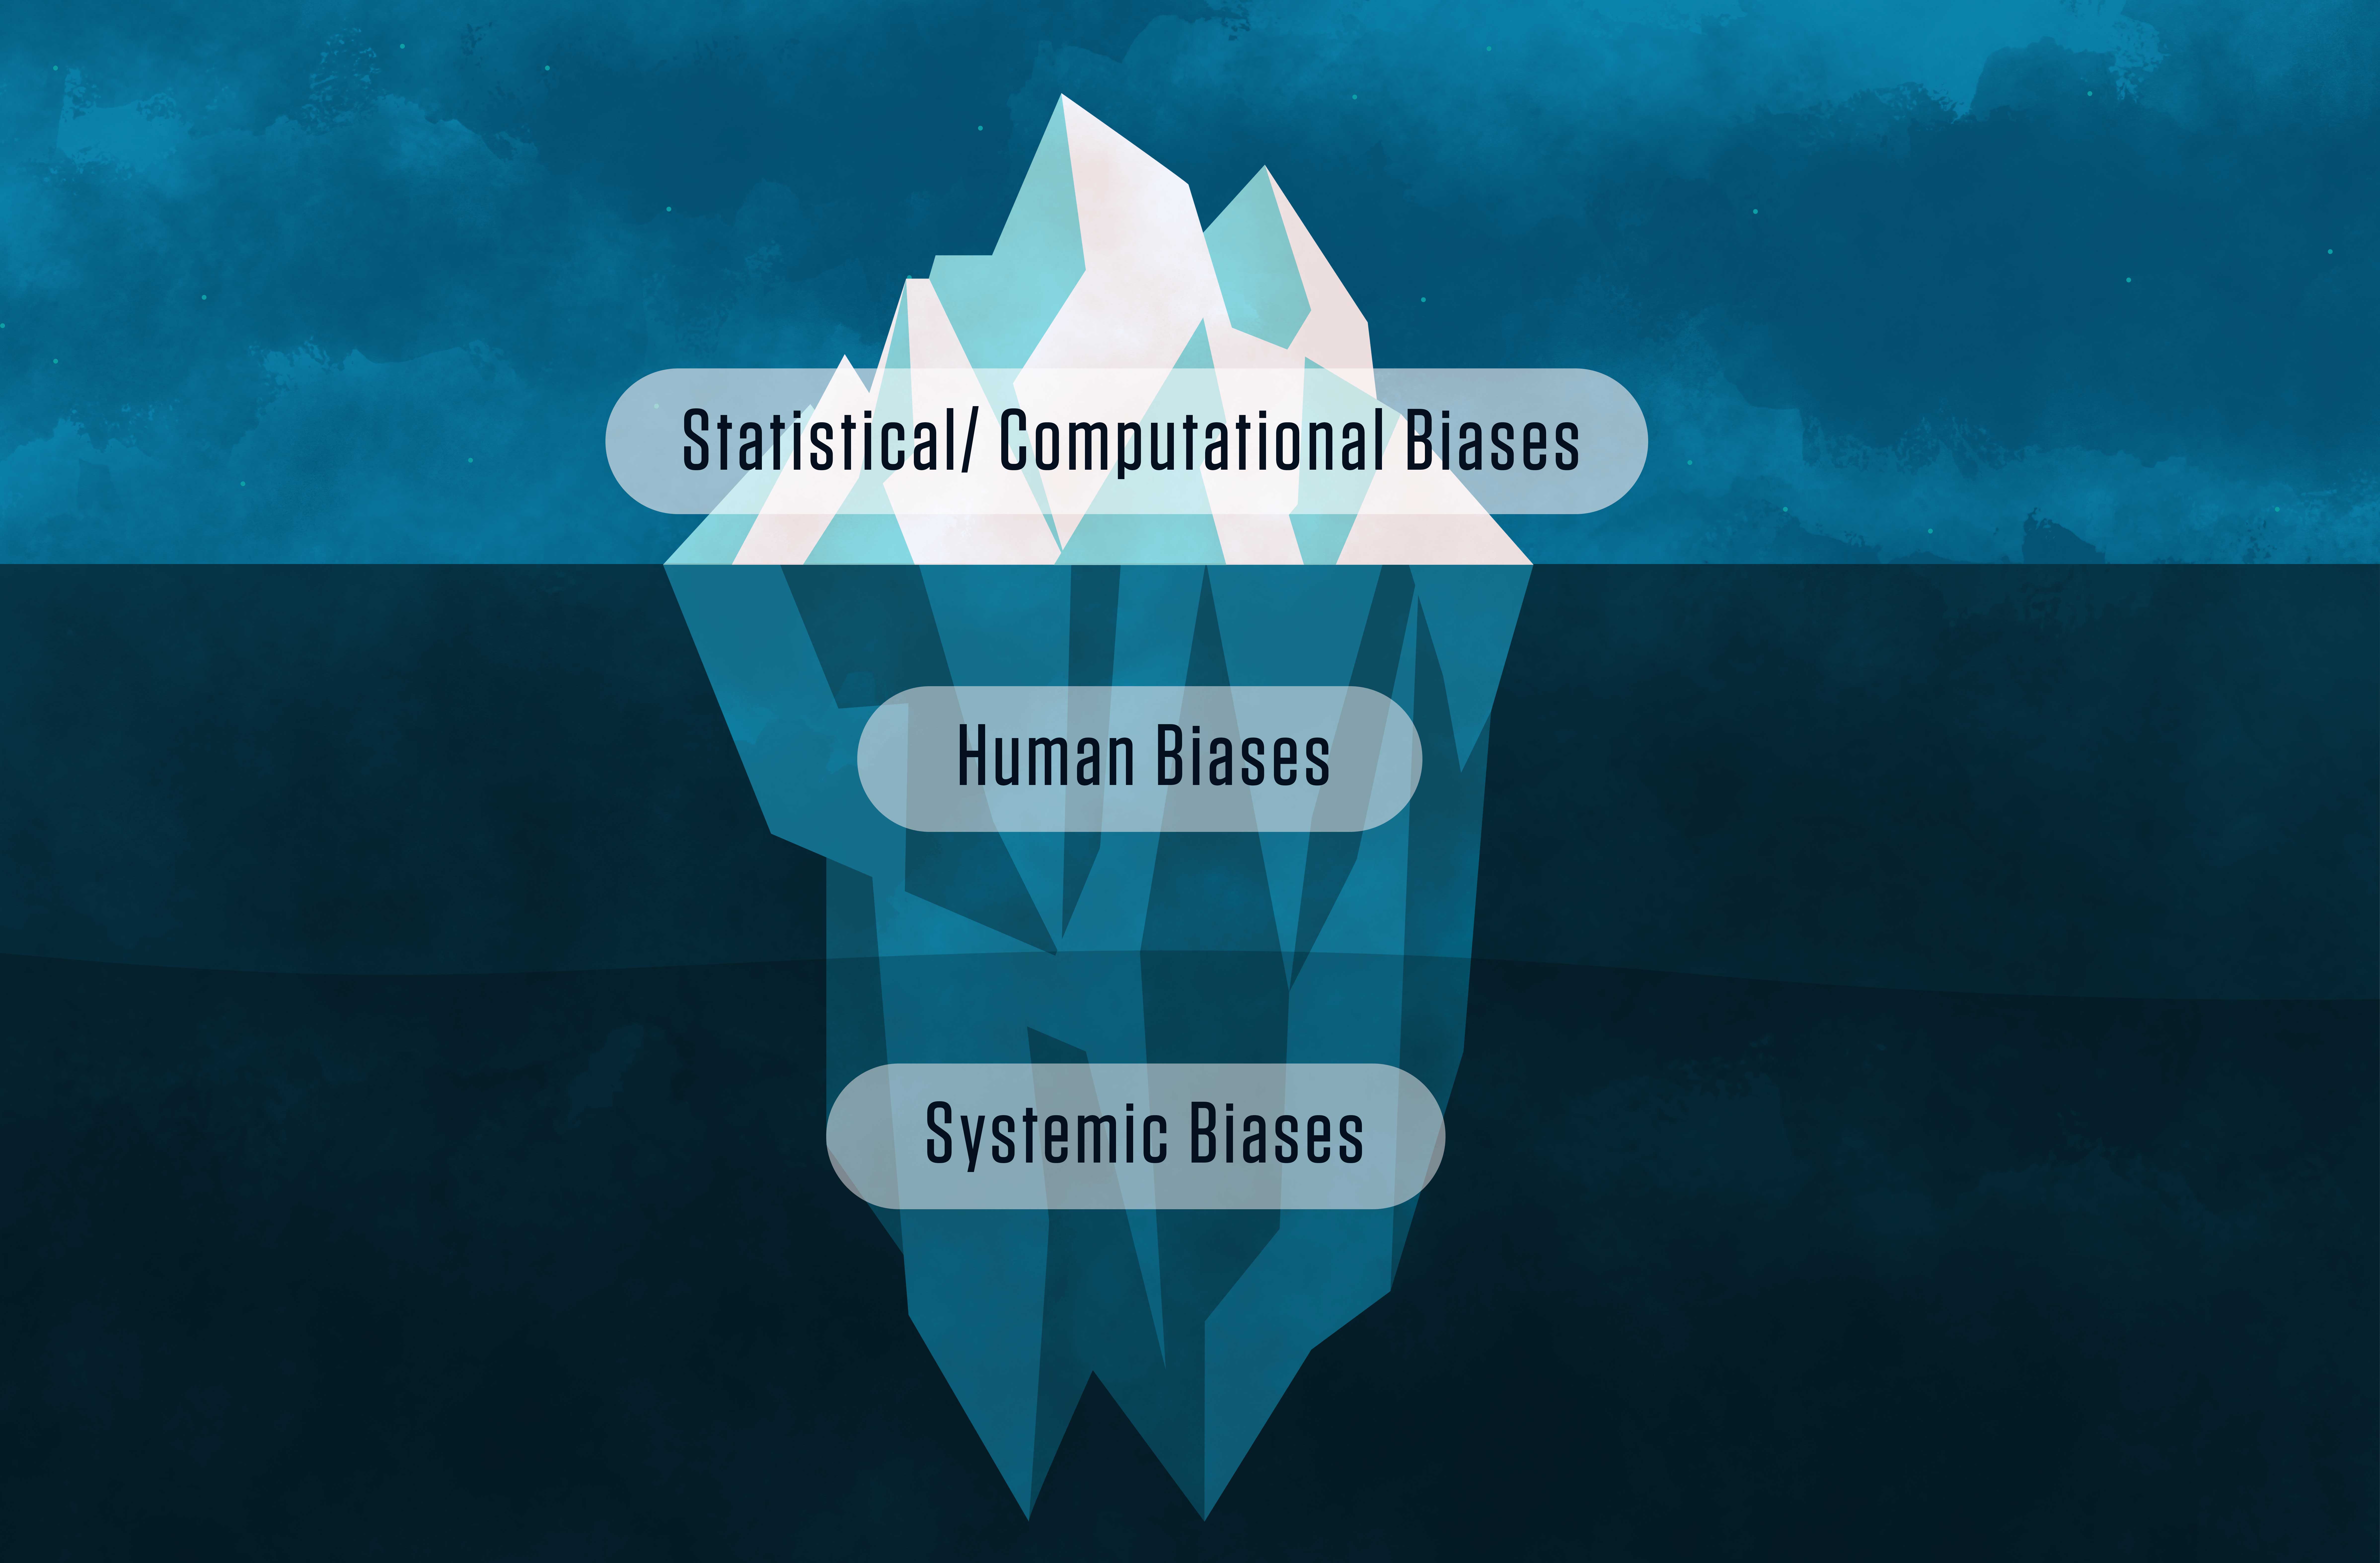 An iceberg is shown, labeled with technical biases above the water's surface and with human biases and systemic biases underwater. 